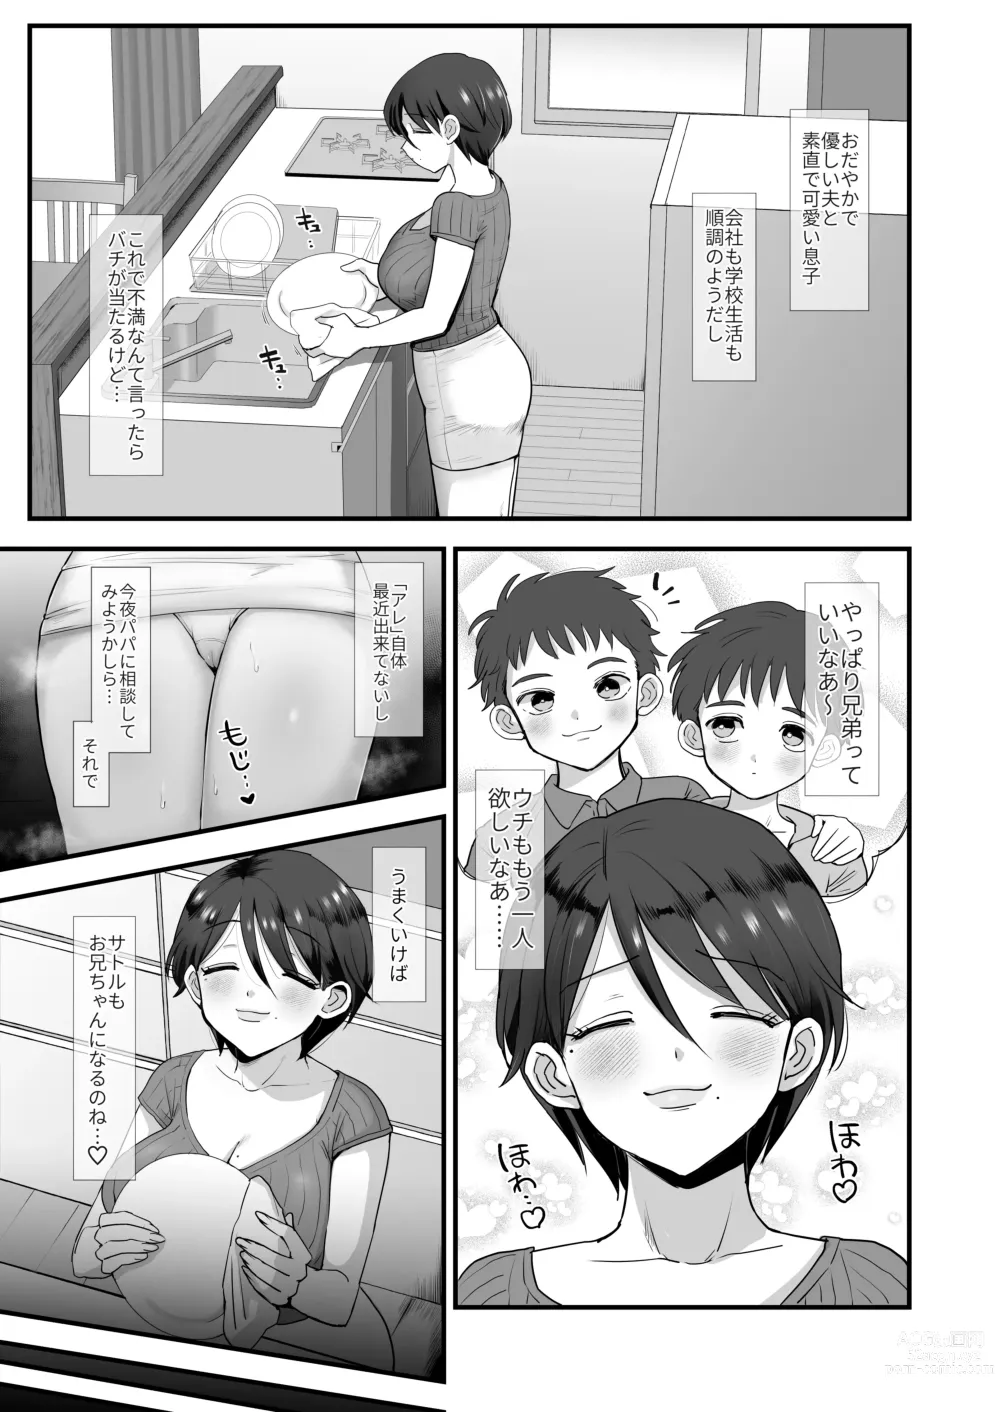 Page 5 of doujinshi Gentle, Busty, Narrow Eyed Momma.